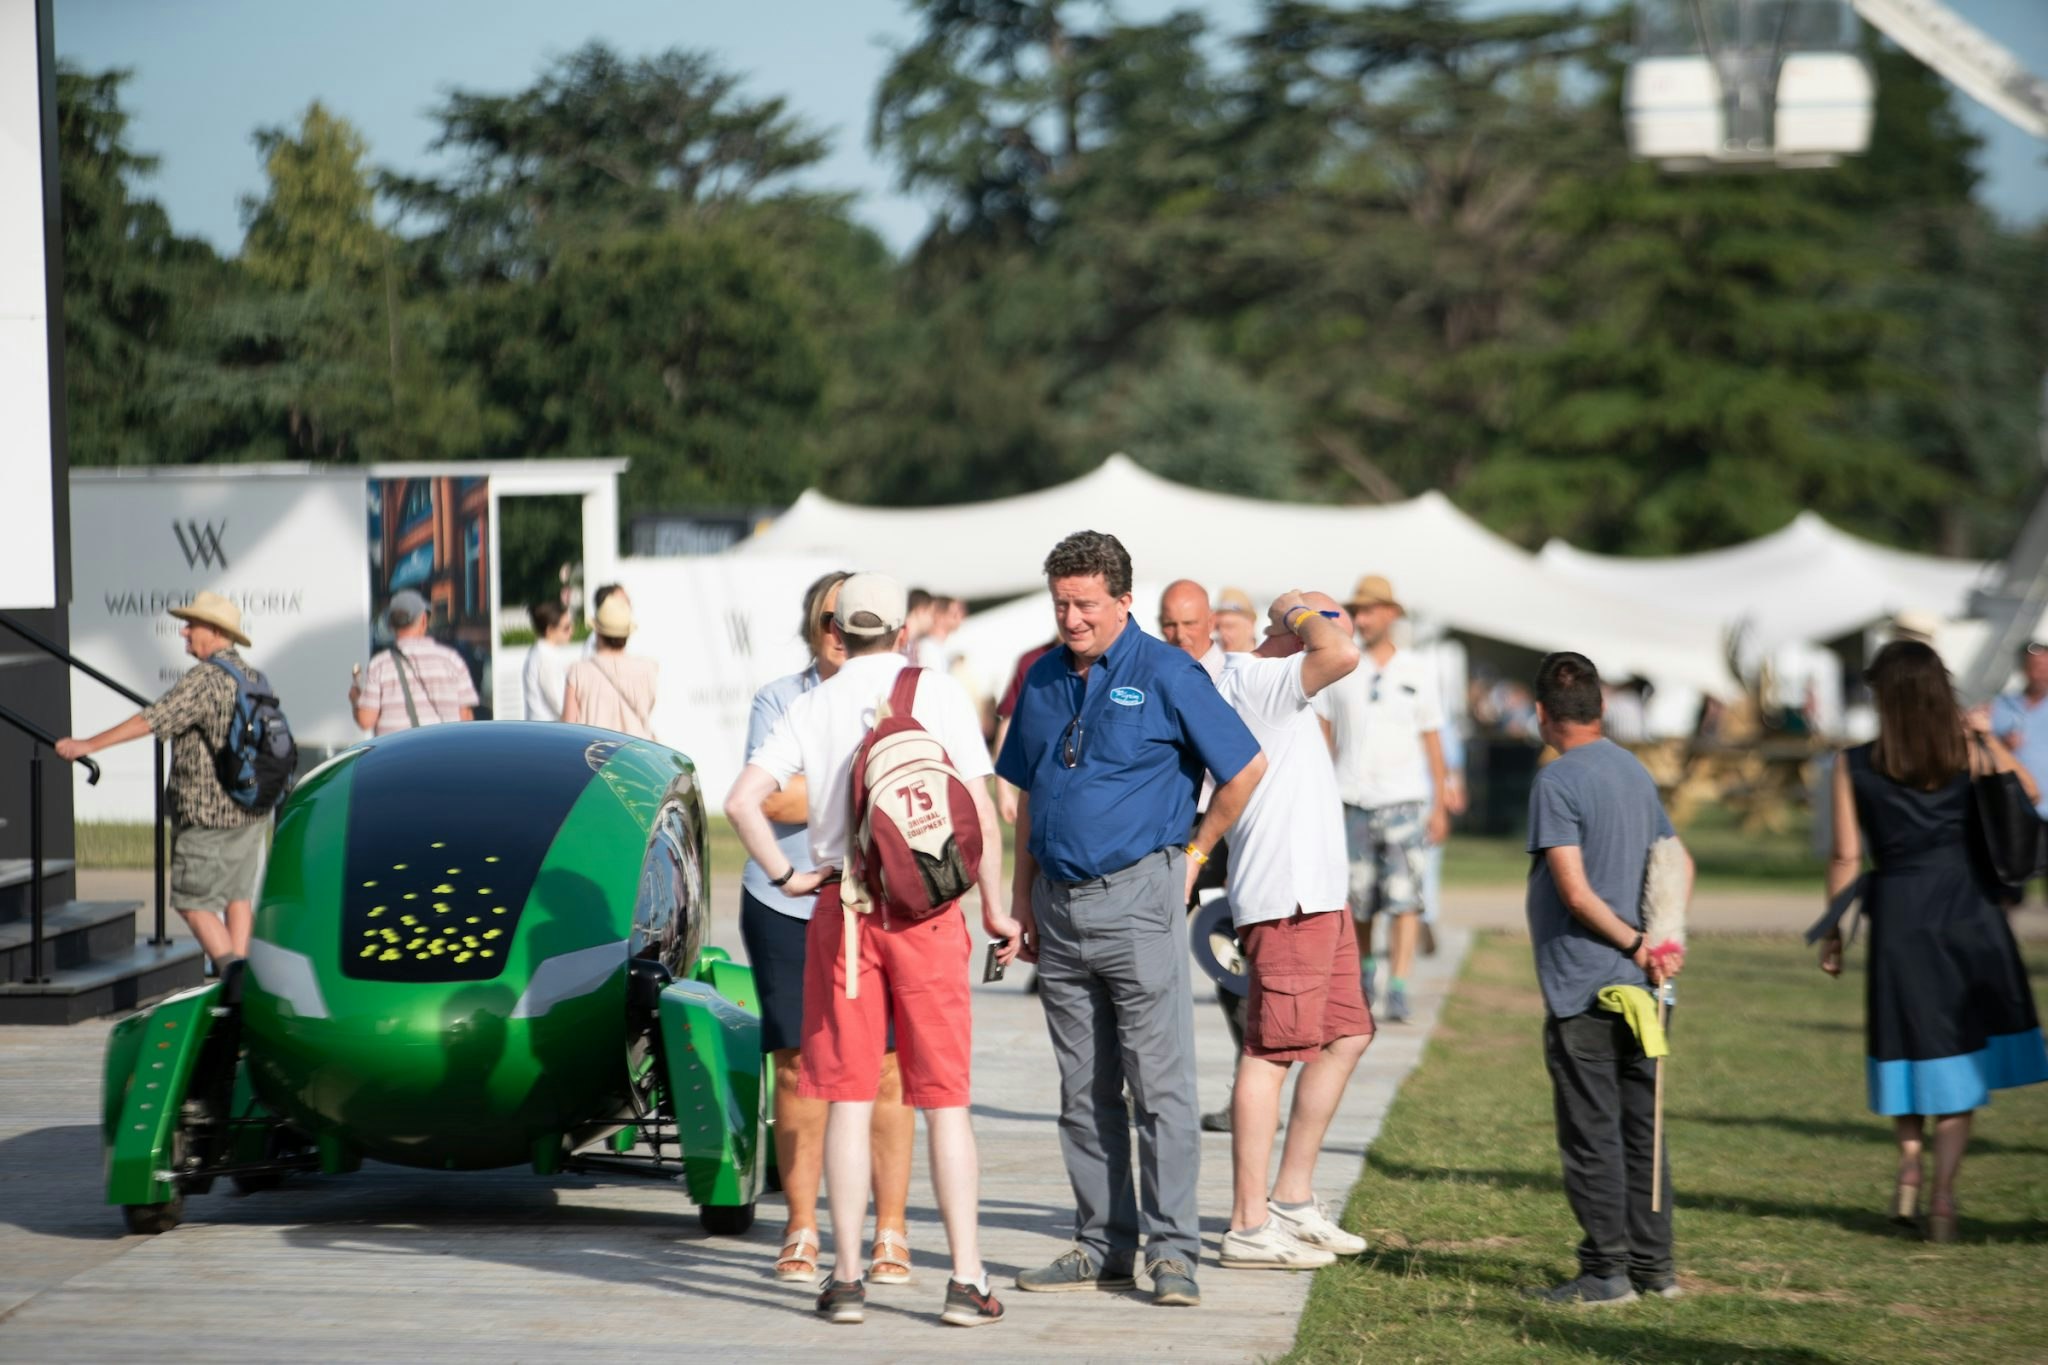 Kar-go was launched at Goodwood